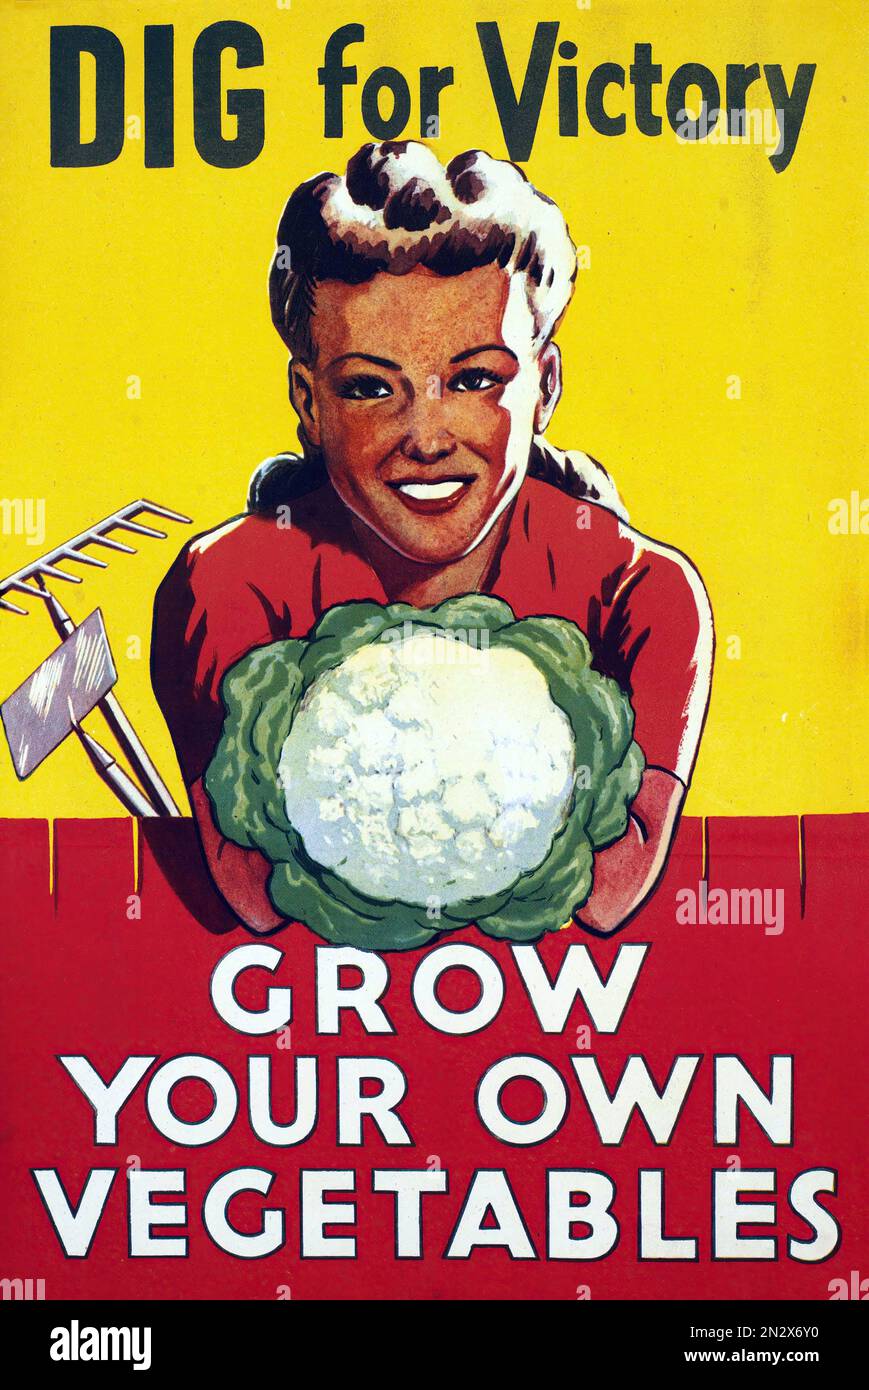 Dig for victory grow you own vegetables - US Propaganda Poster - WWII Stock Photo